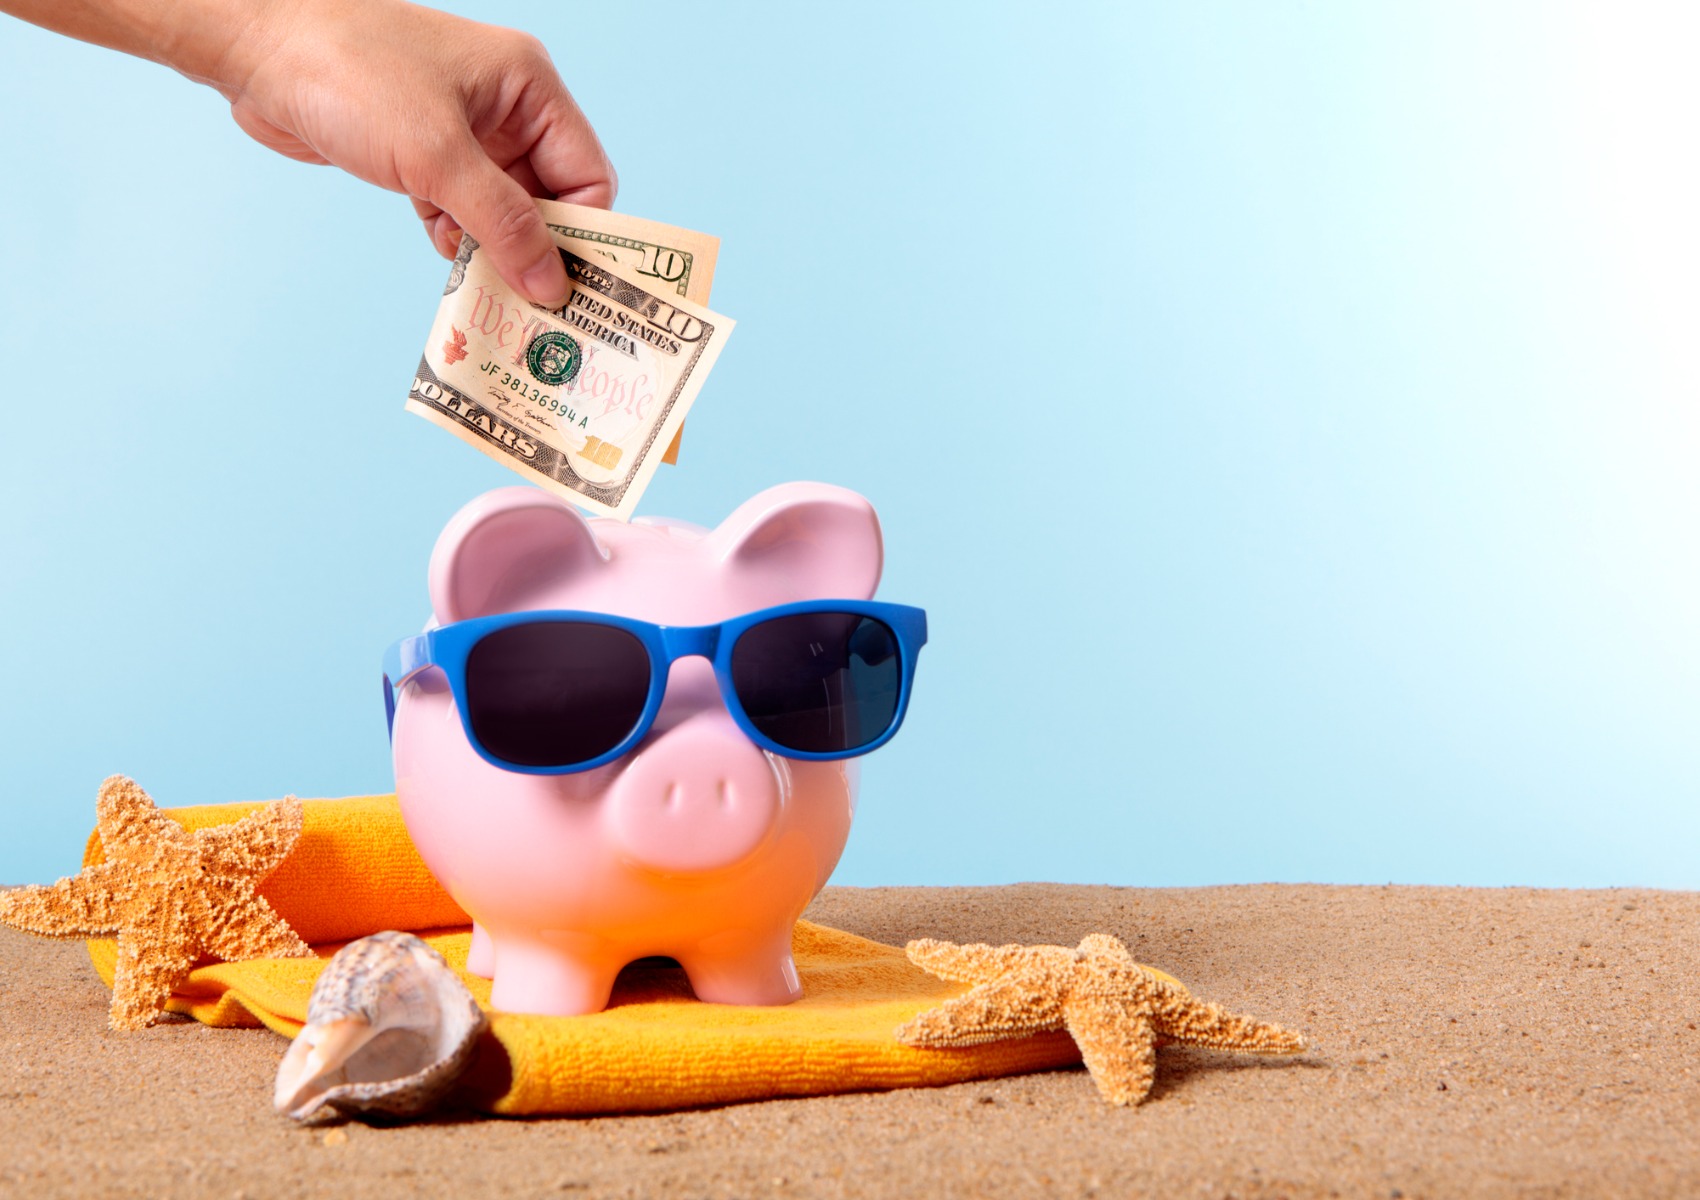 pink-piggy-bank-with-beach-items-and-money-being-put-in-picture-id166513010